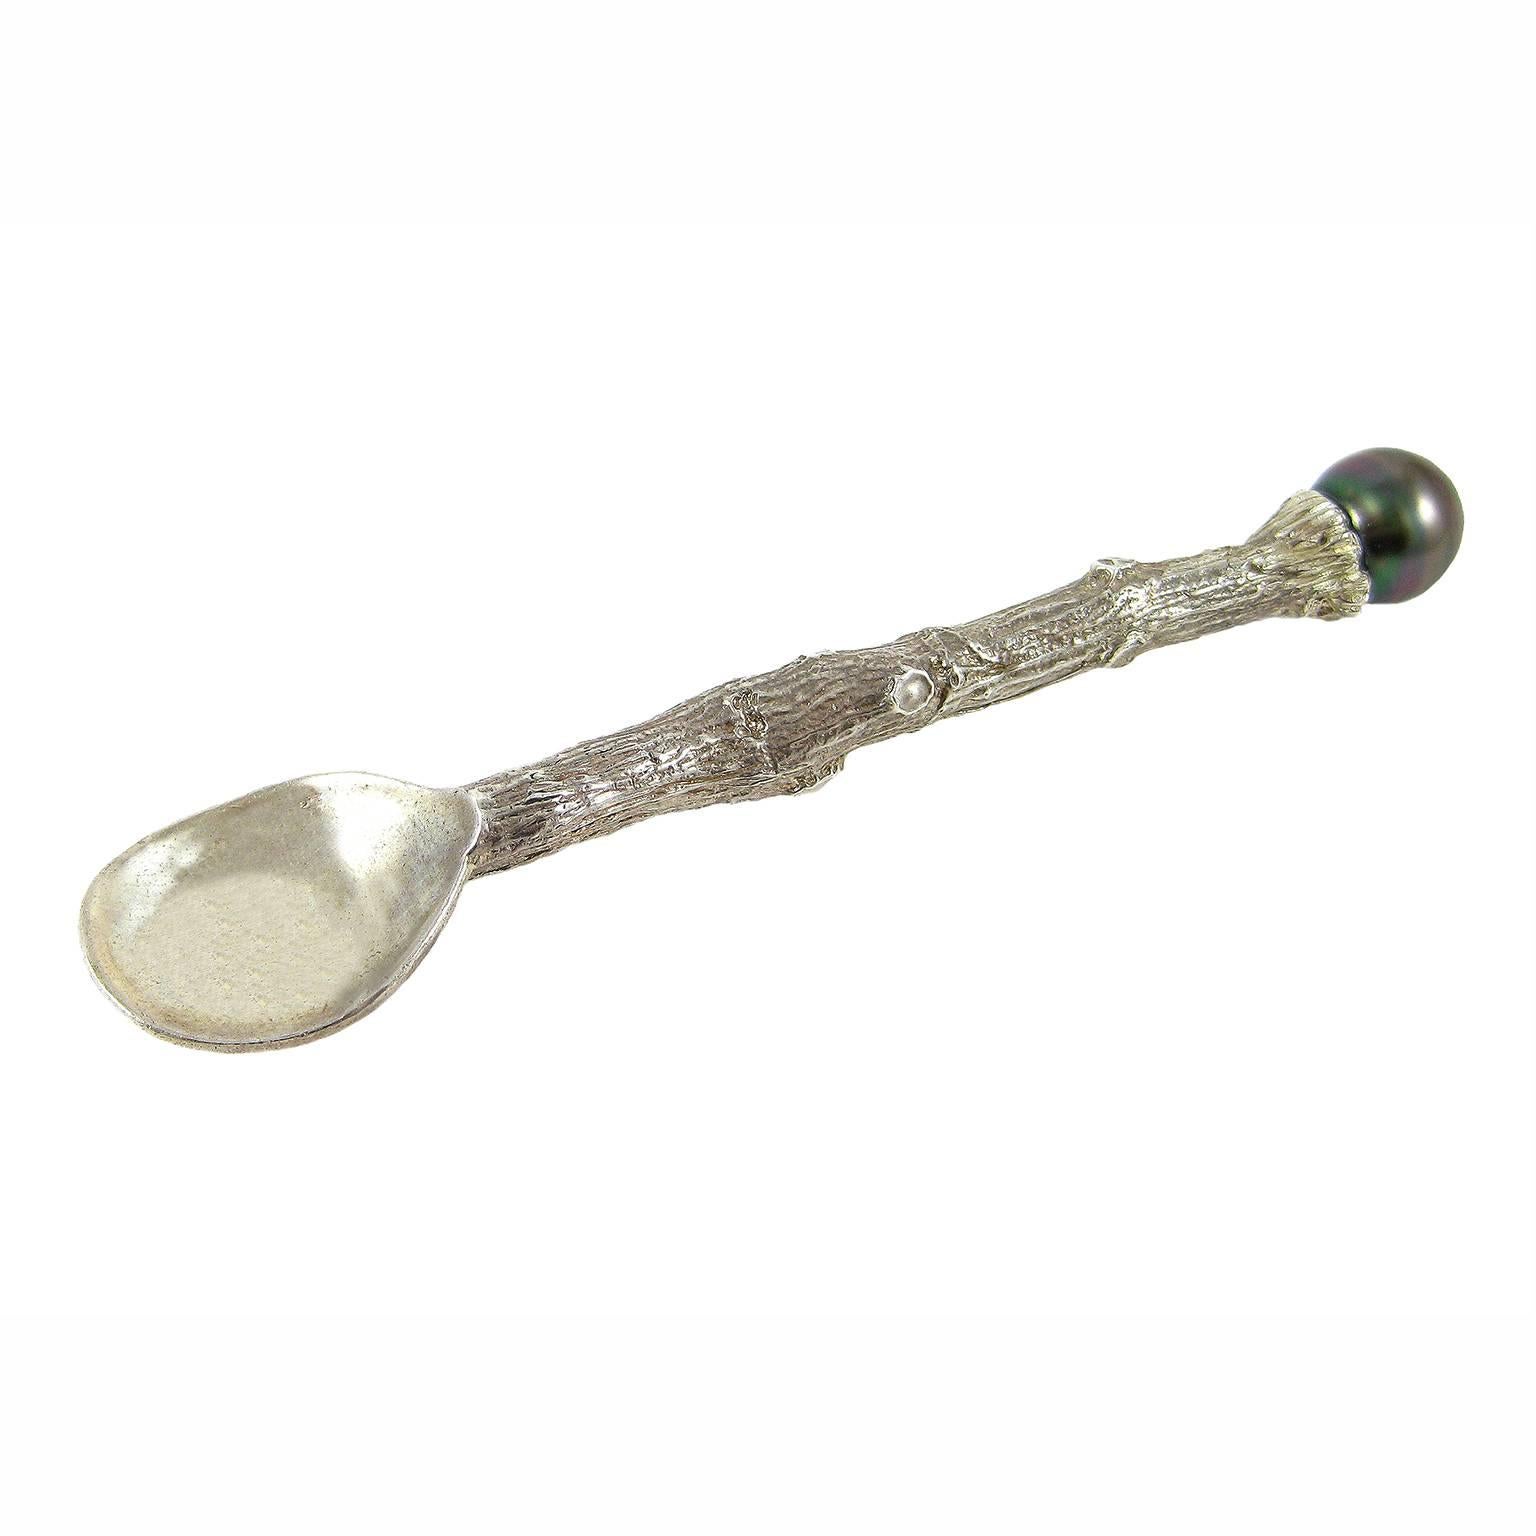 From the K. Brunini Object d'Art collection comes this nature-inspired and uniquely designed collectible to grace your table top.

An heirloom for the table, or accent to the K. Brunini salt cellar, this delicate salt spoon in Sterling Silver